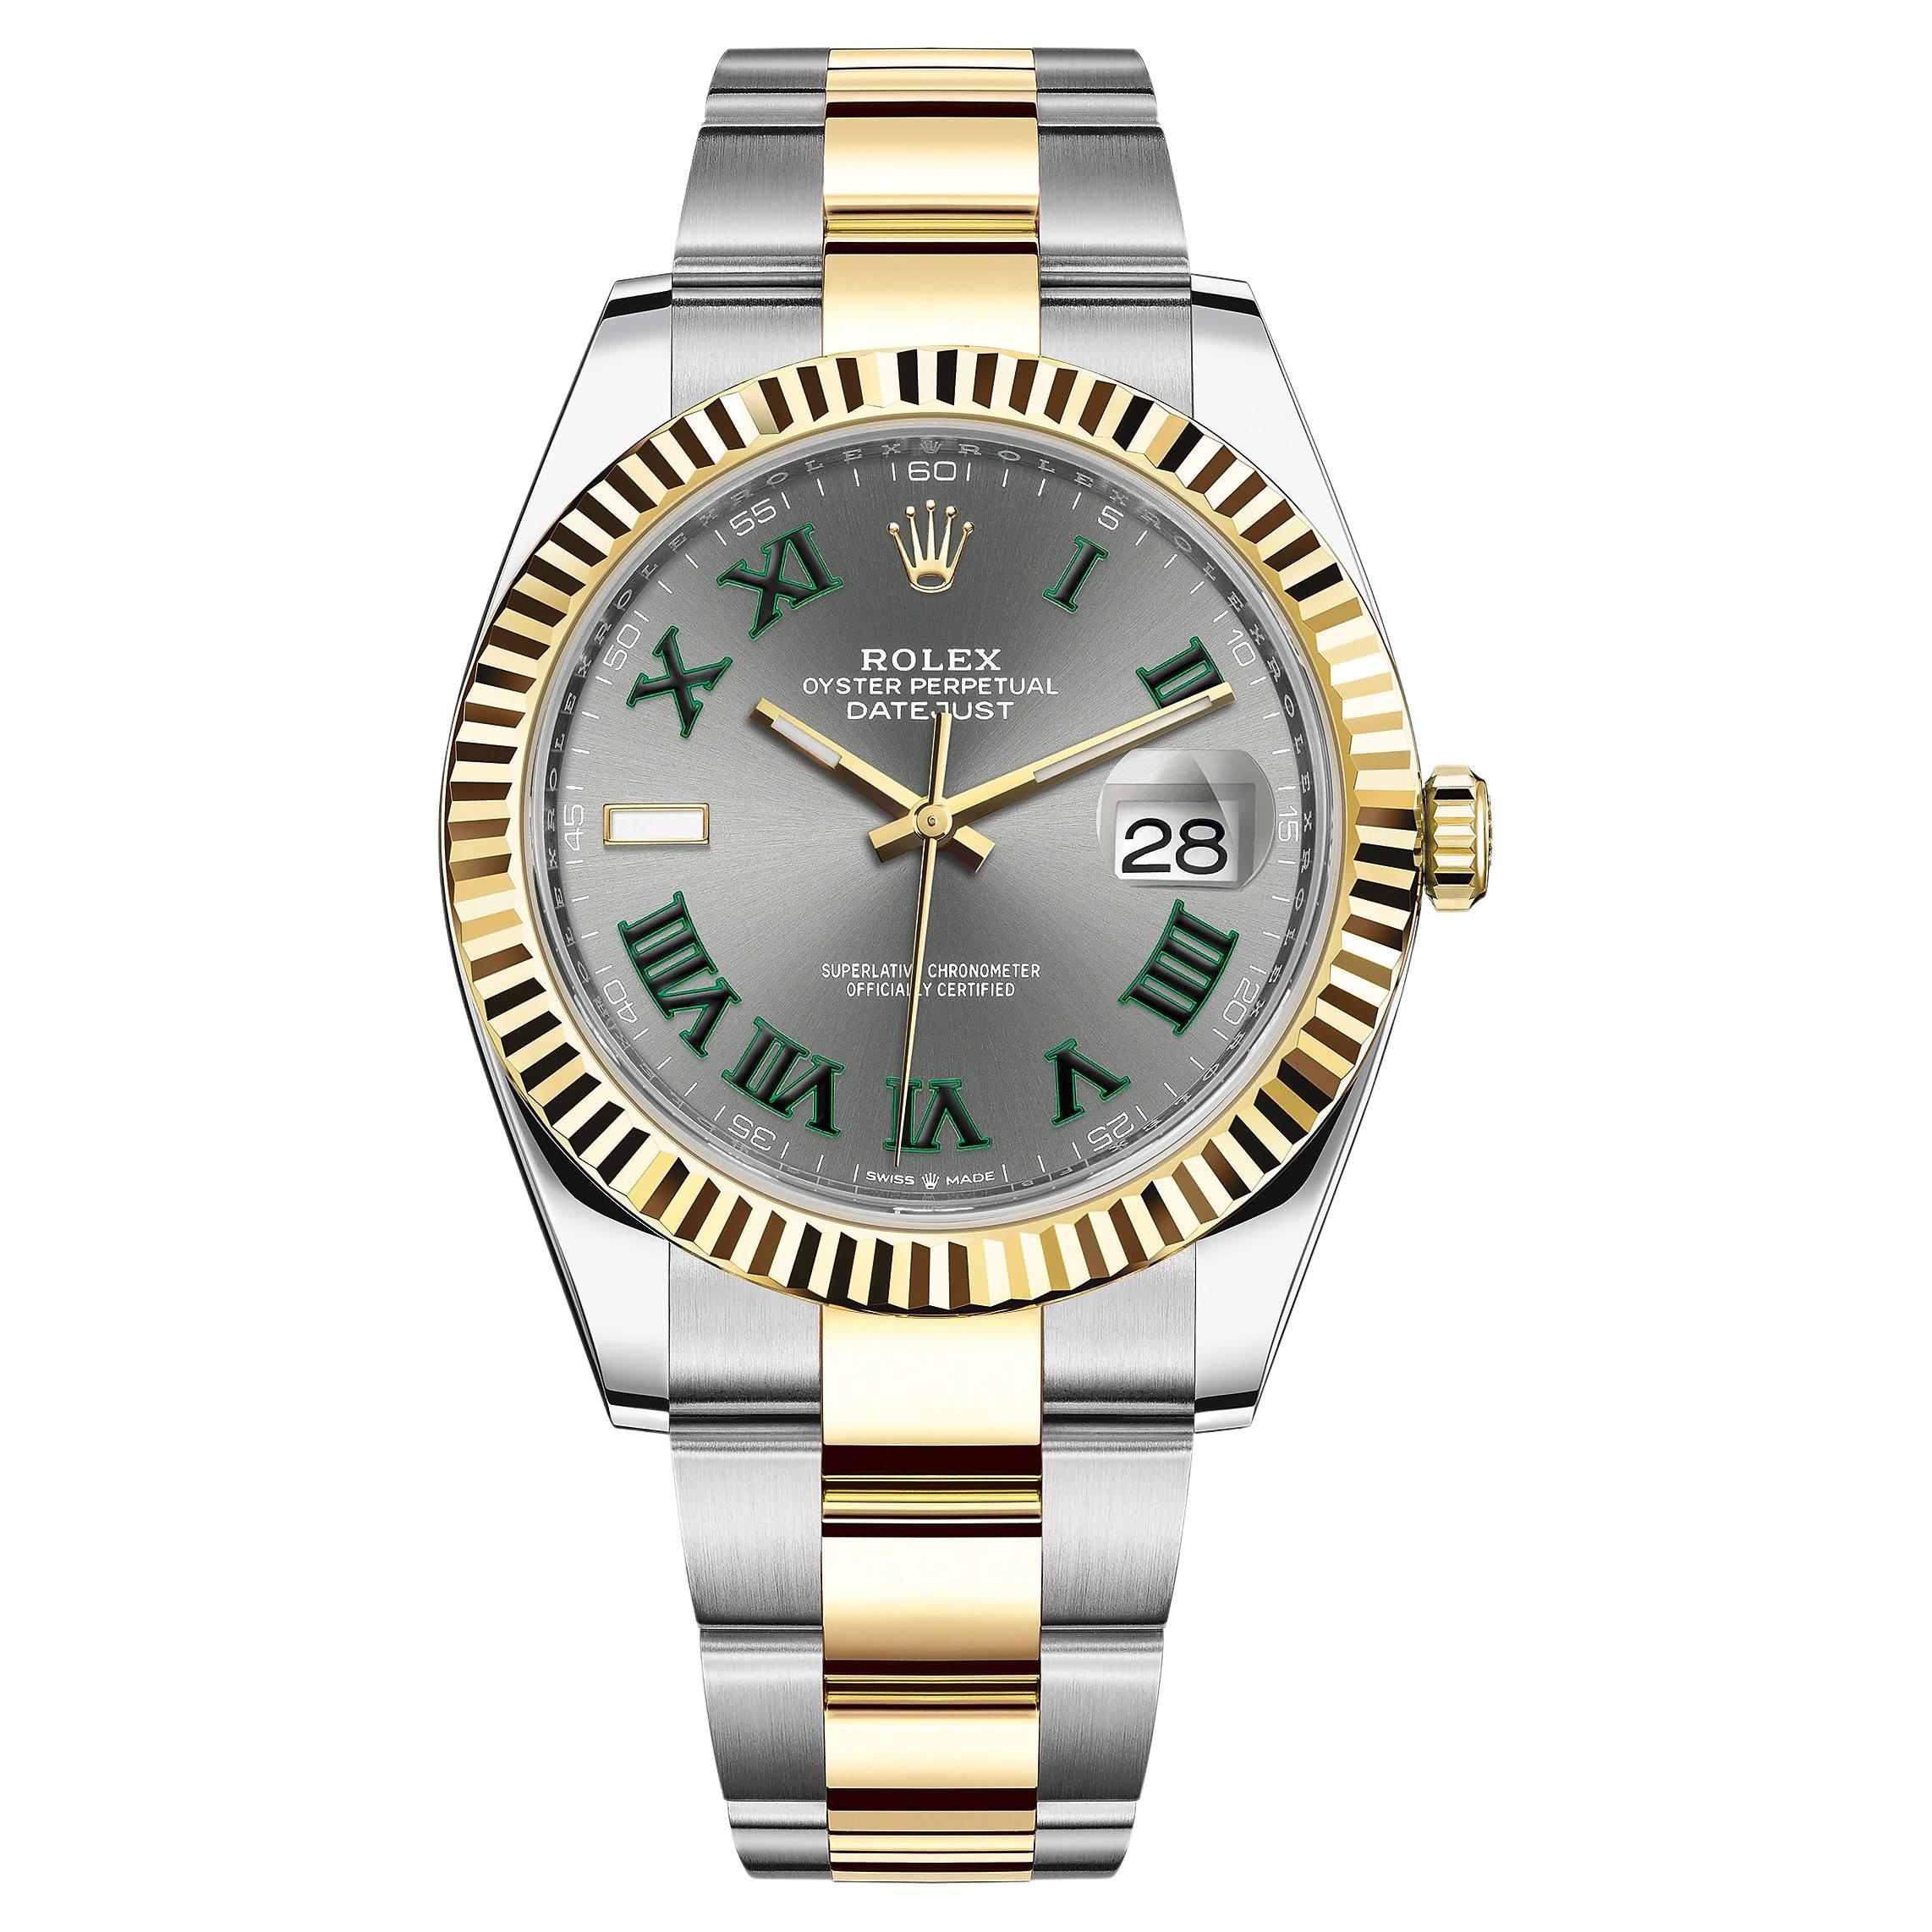 Rolex Datejust, 41 mm, Wimbledon, Oyster, Fluted, 126333, Unworn Watch, Complete For Sale